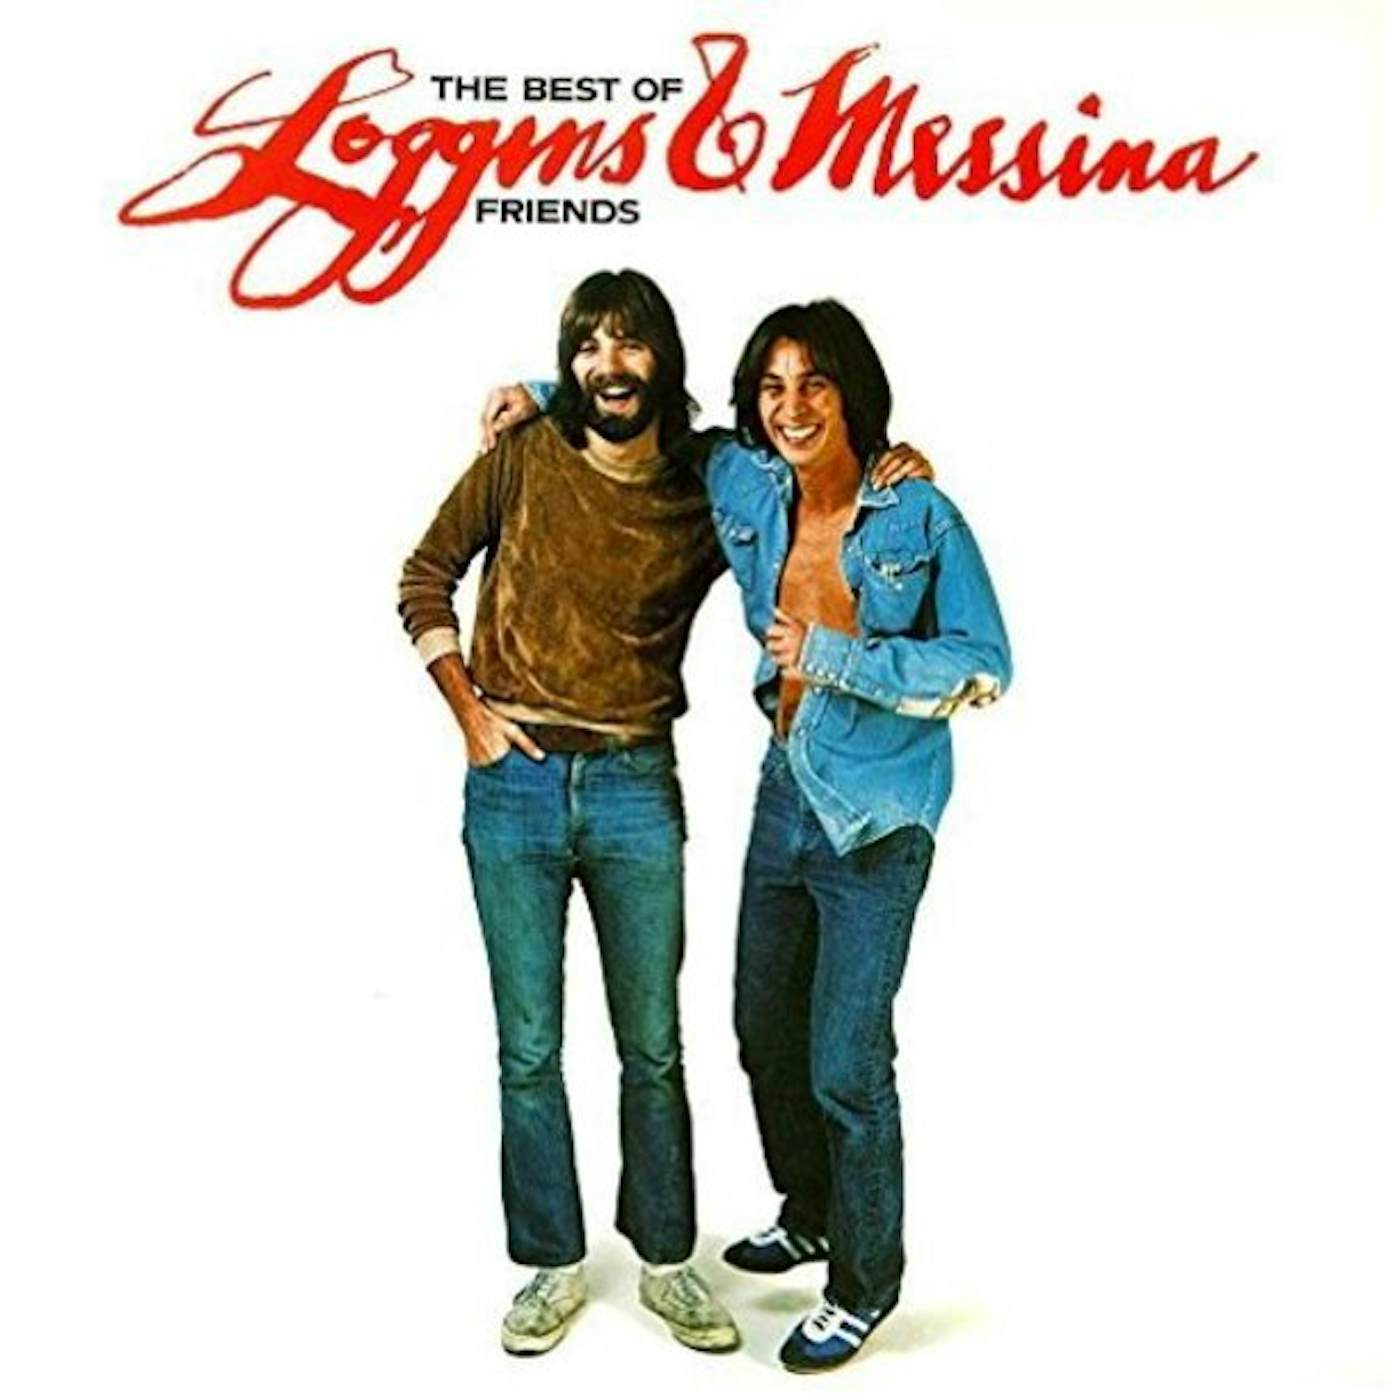 Loggins & Messina BEST OF FRIENDS - GREATEST HITS Vinyl Record